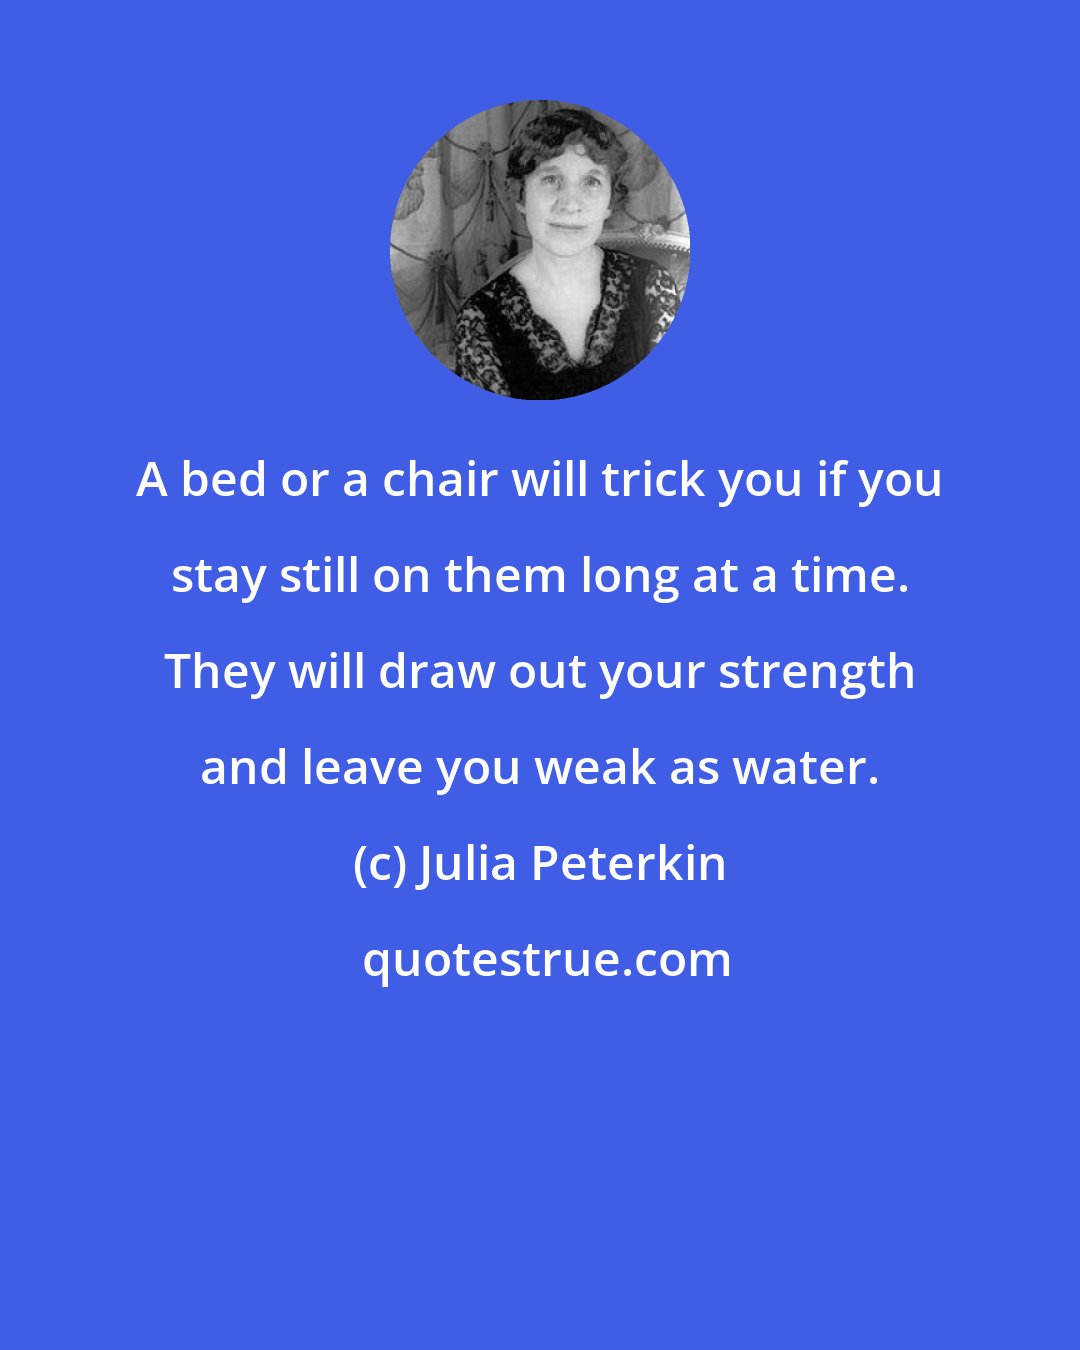 Julia Peterkin: A bed or a chair will trick you if you stay still on them long at a time. They will draw out your strength and leave you weak as water.